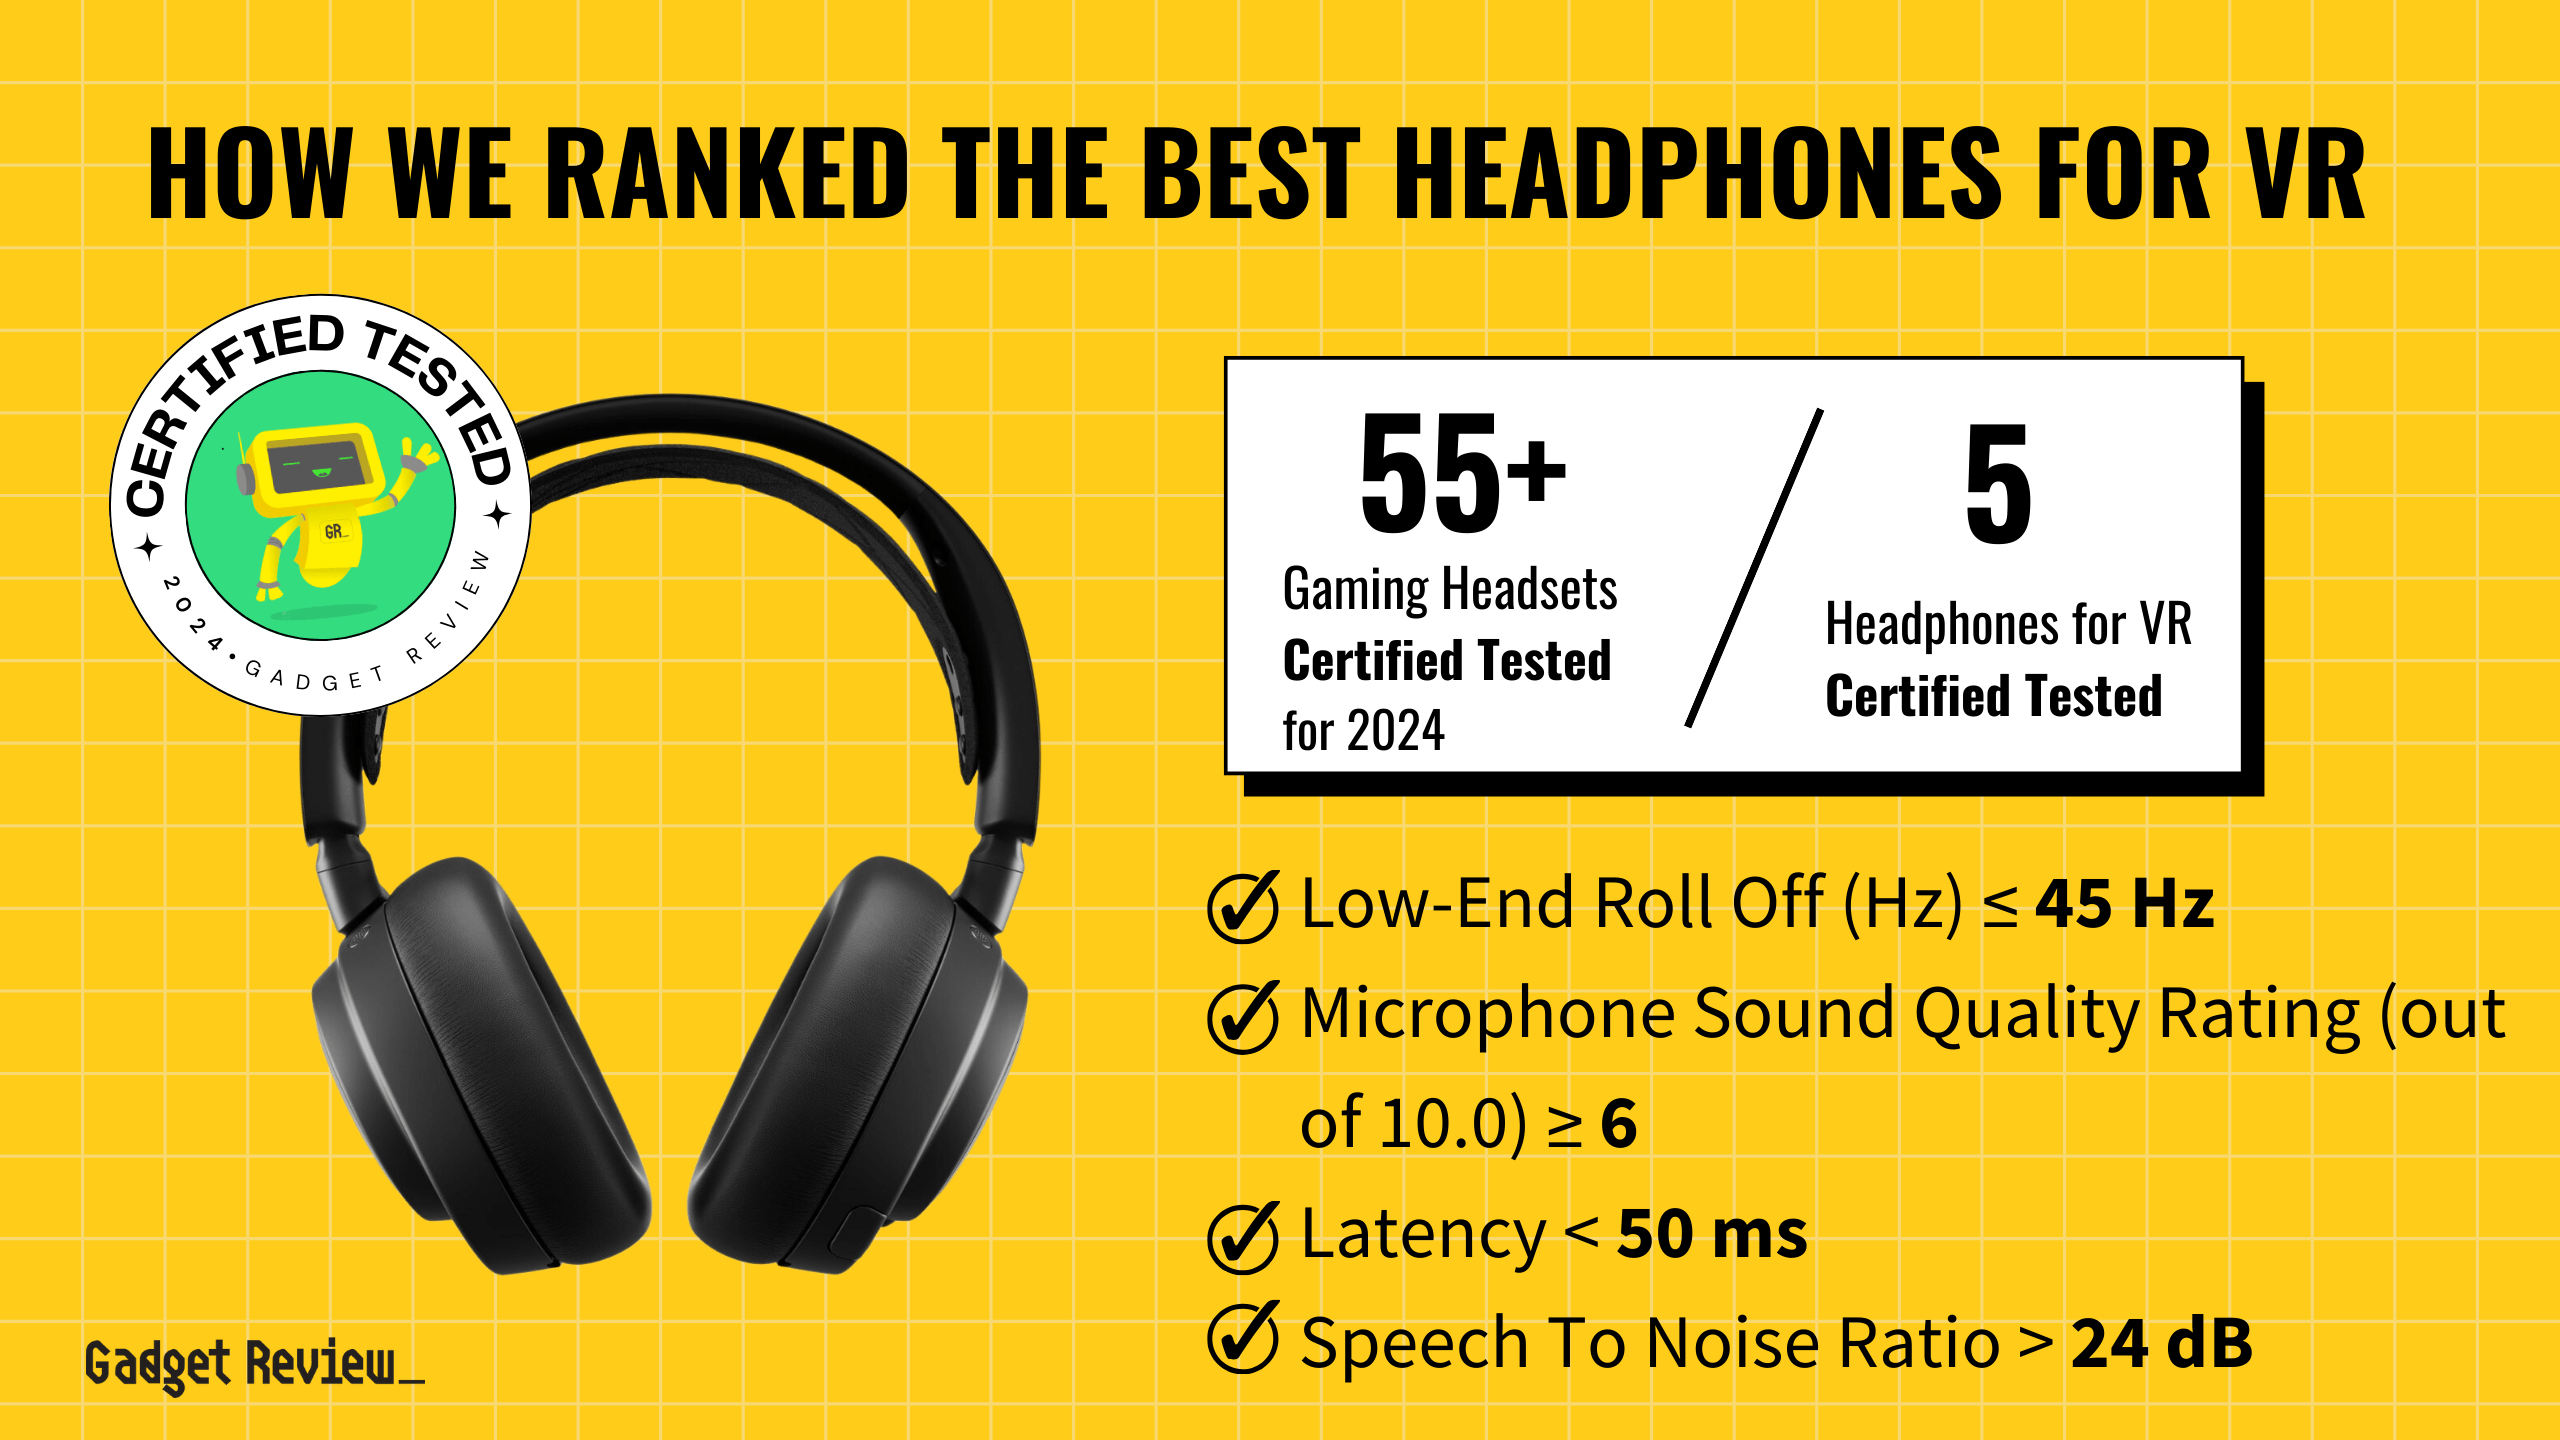 best headphones for vr guide that shows the top best gaming headset model